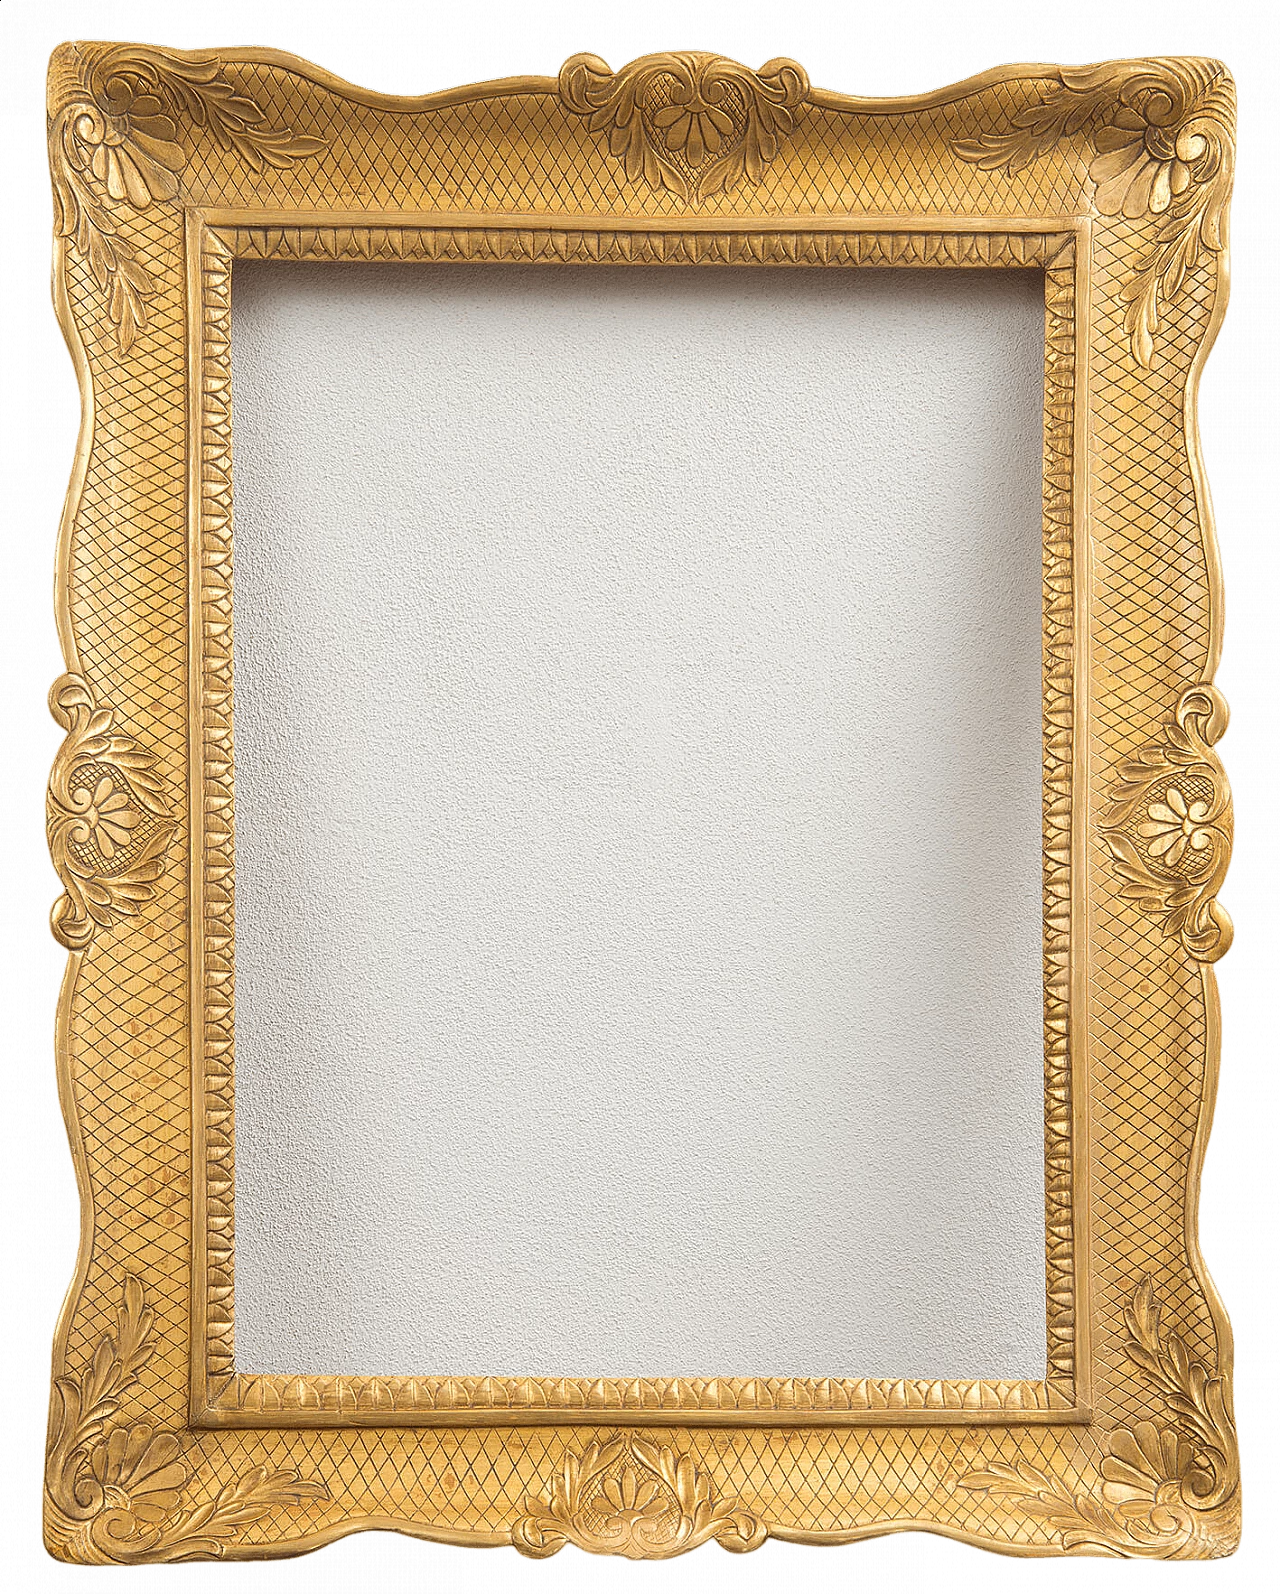 Neapolitan Empire gilded wood frame, early 19th century 4